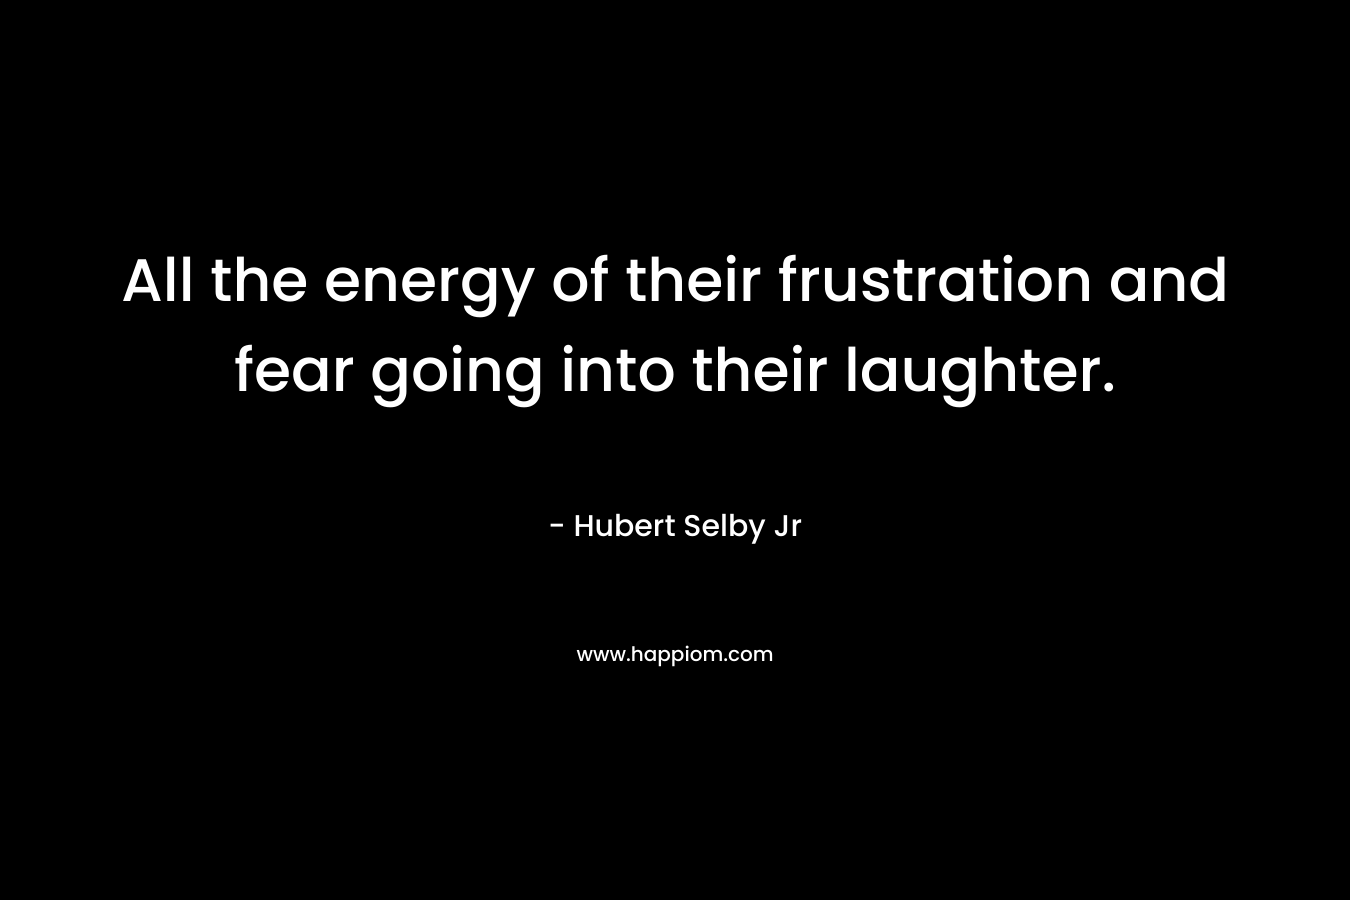 All the energy of their frustration and fear going into their laughter. – Hubert Selby Jr